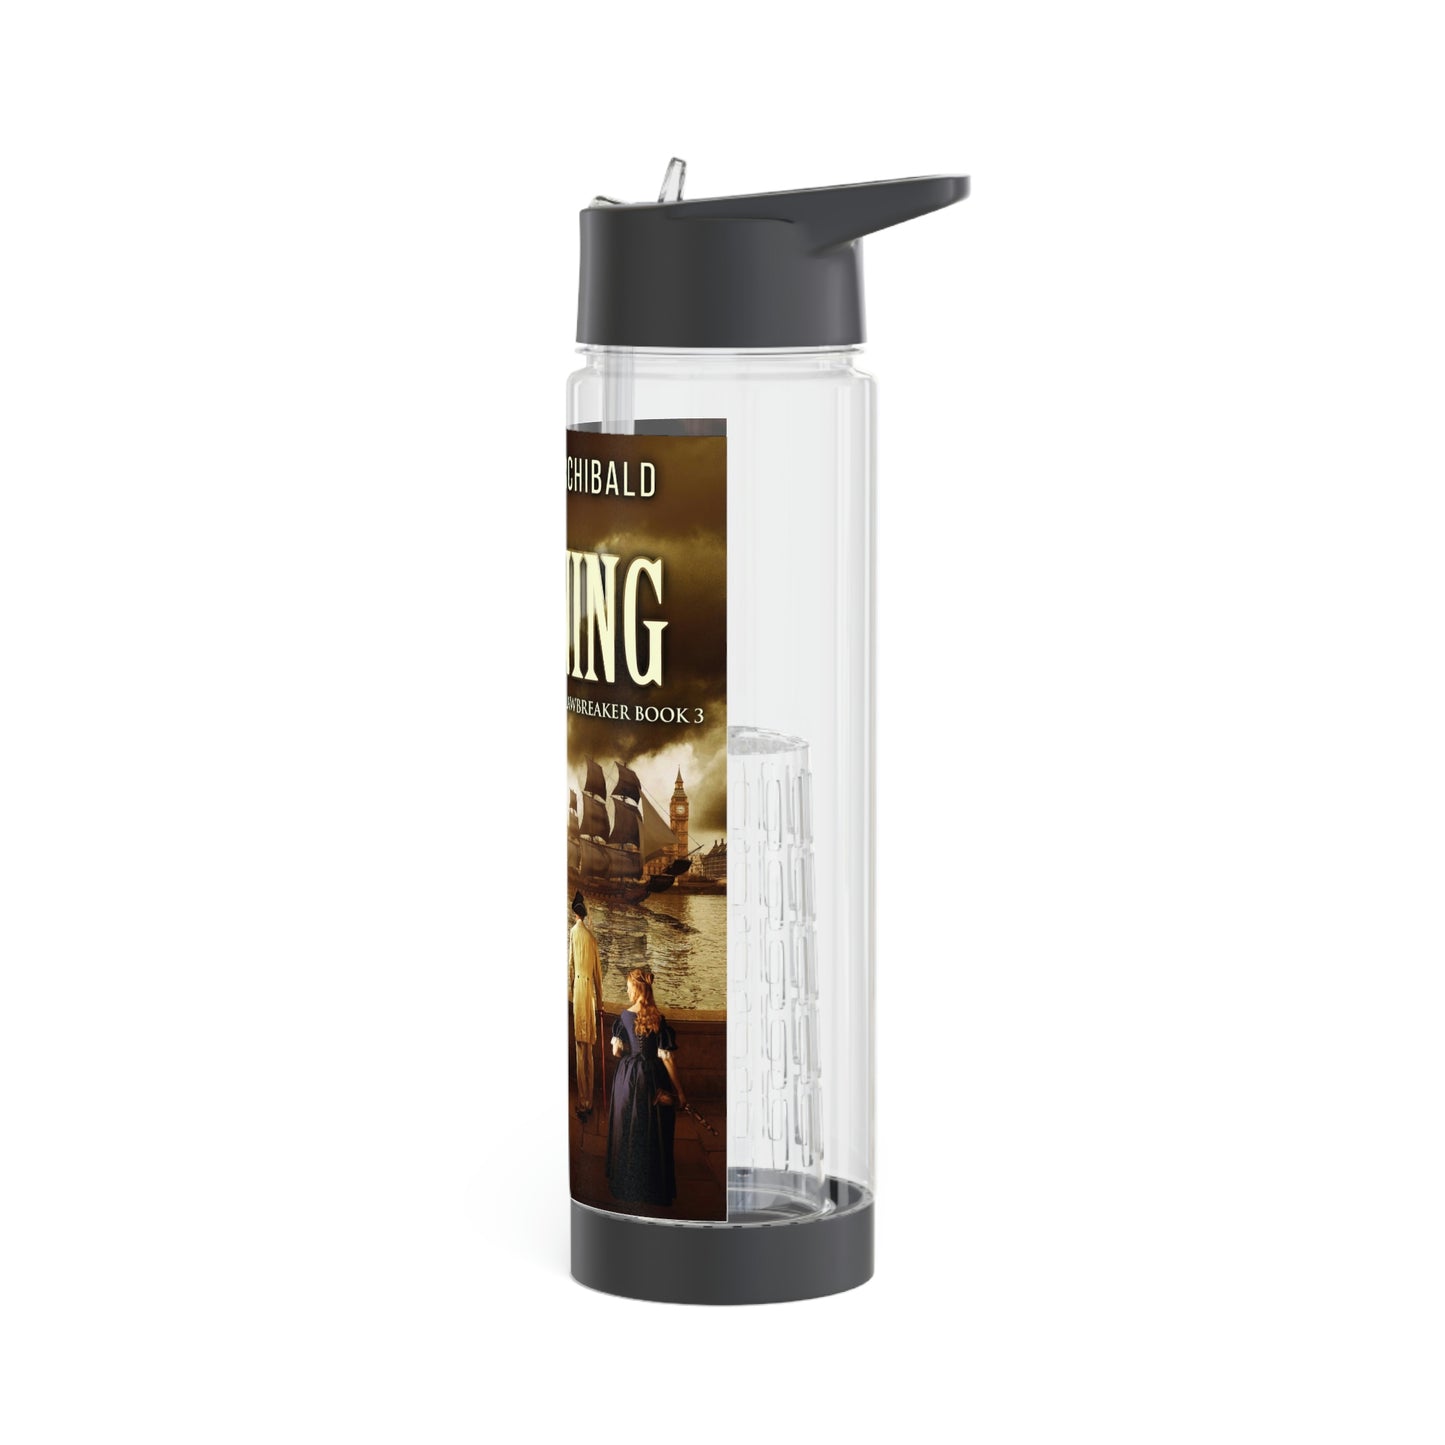 Reigning - Infuser Water Bottle